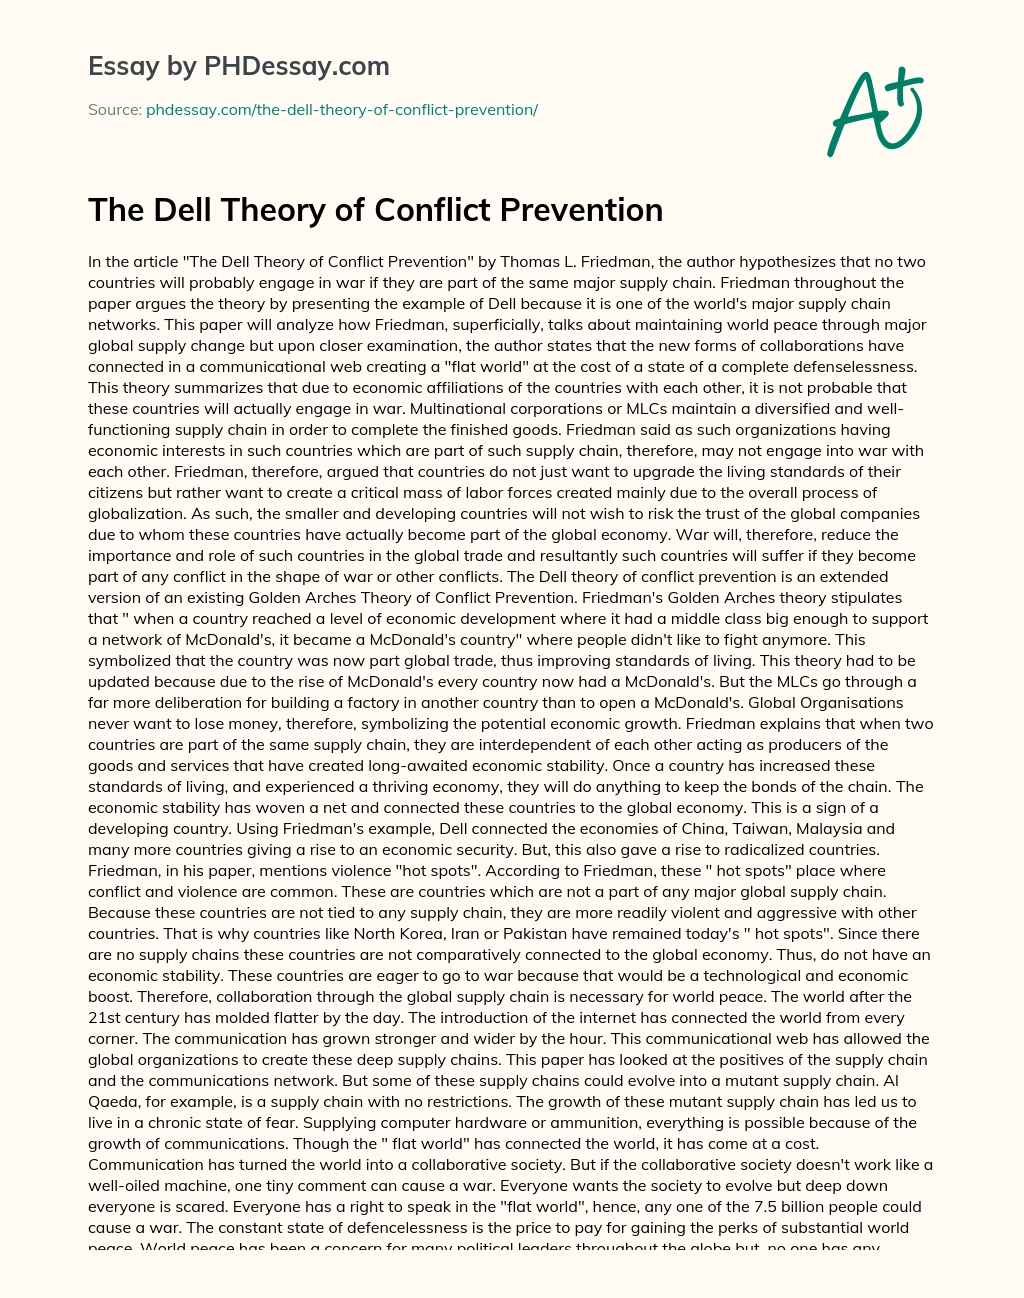 The Dell Theory of Conflict Prevention essay